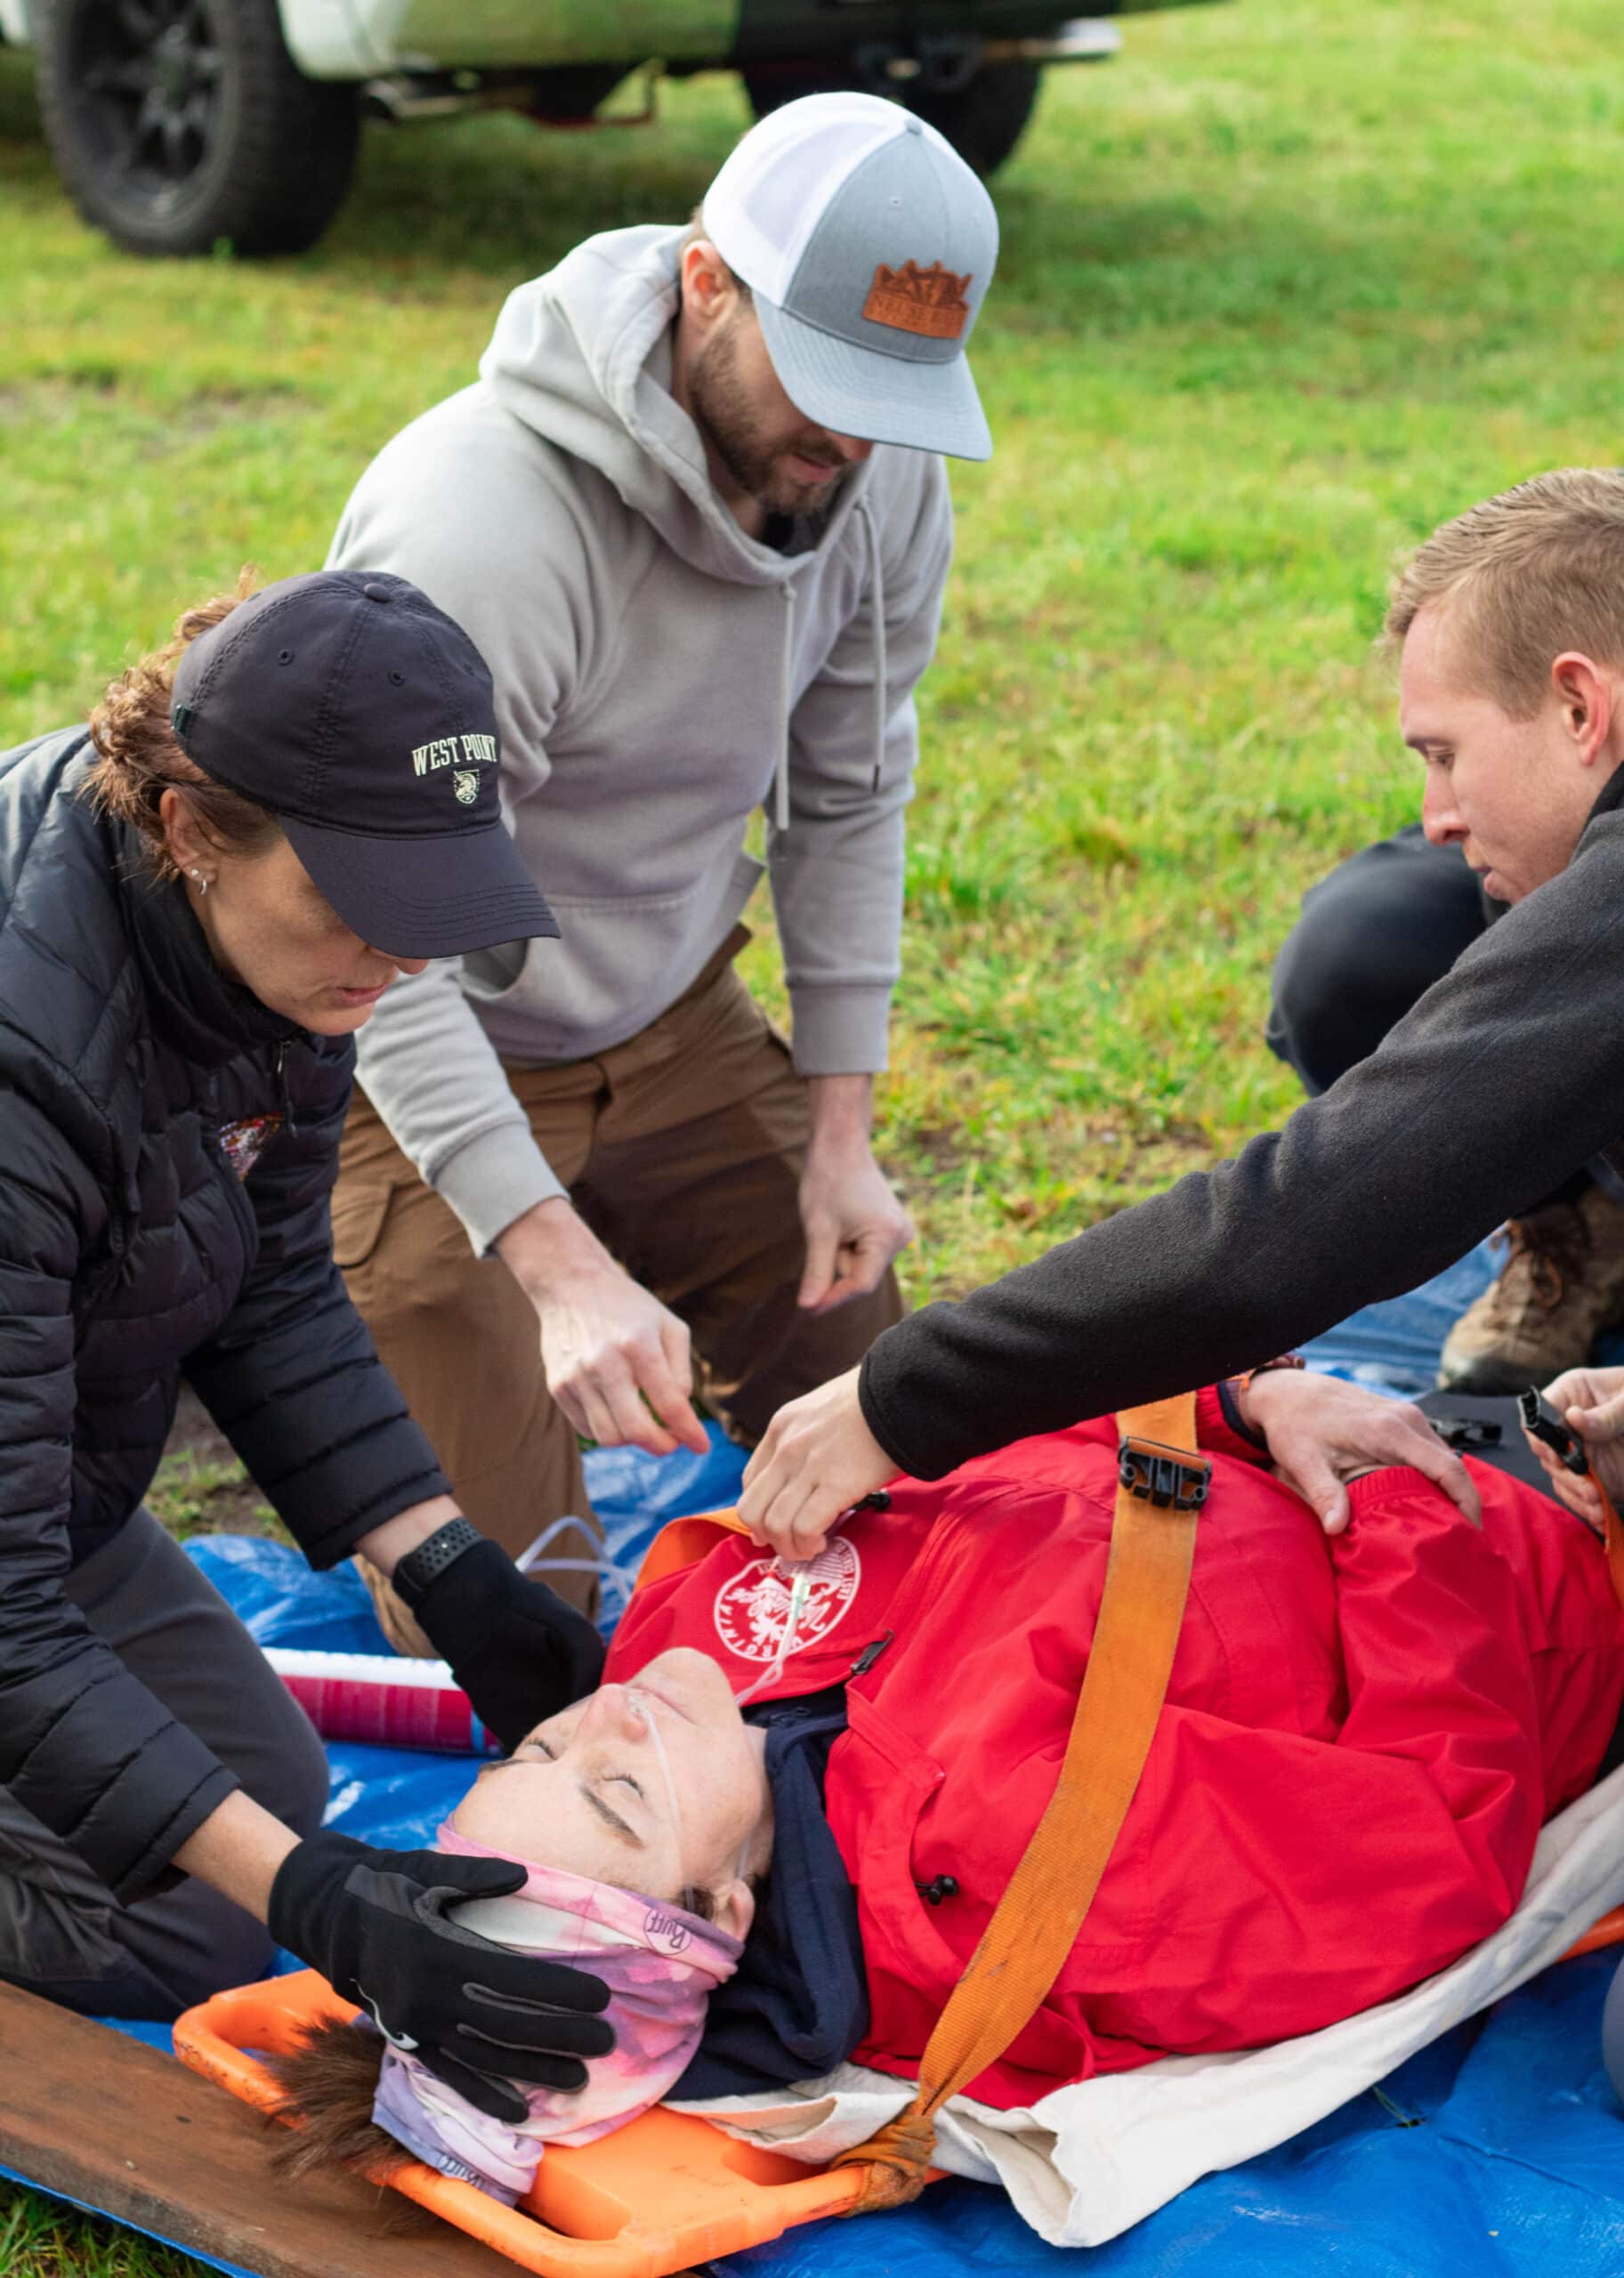 ECU Health emergency medicine residents treat a patient during an exercise at Wildwood Park in Greenville.